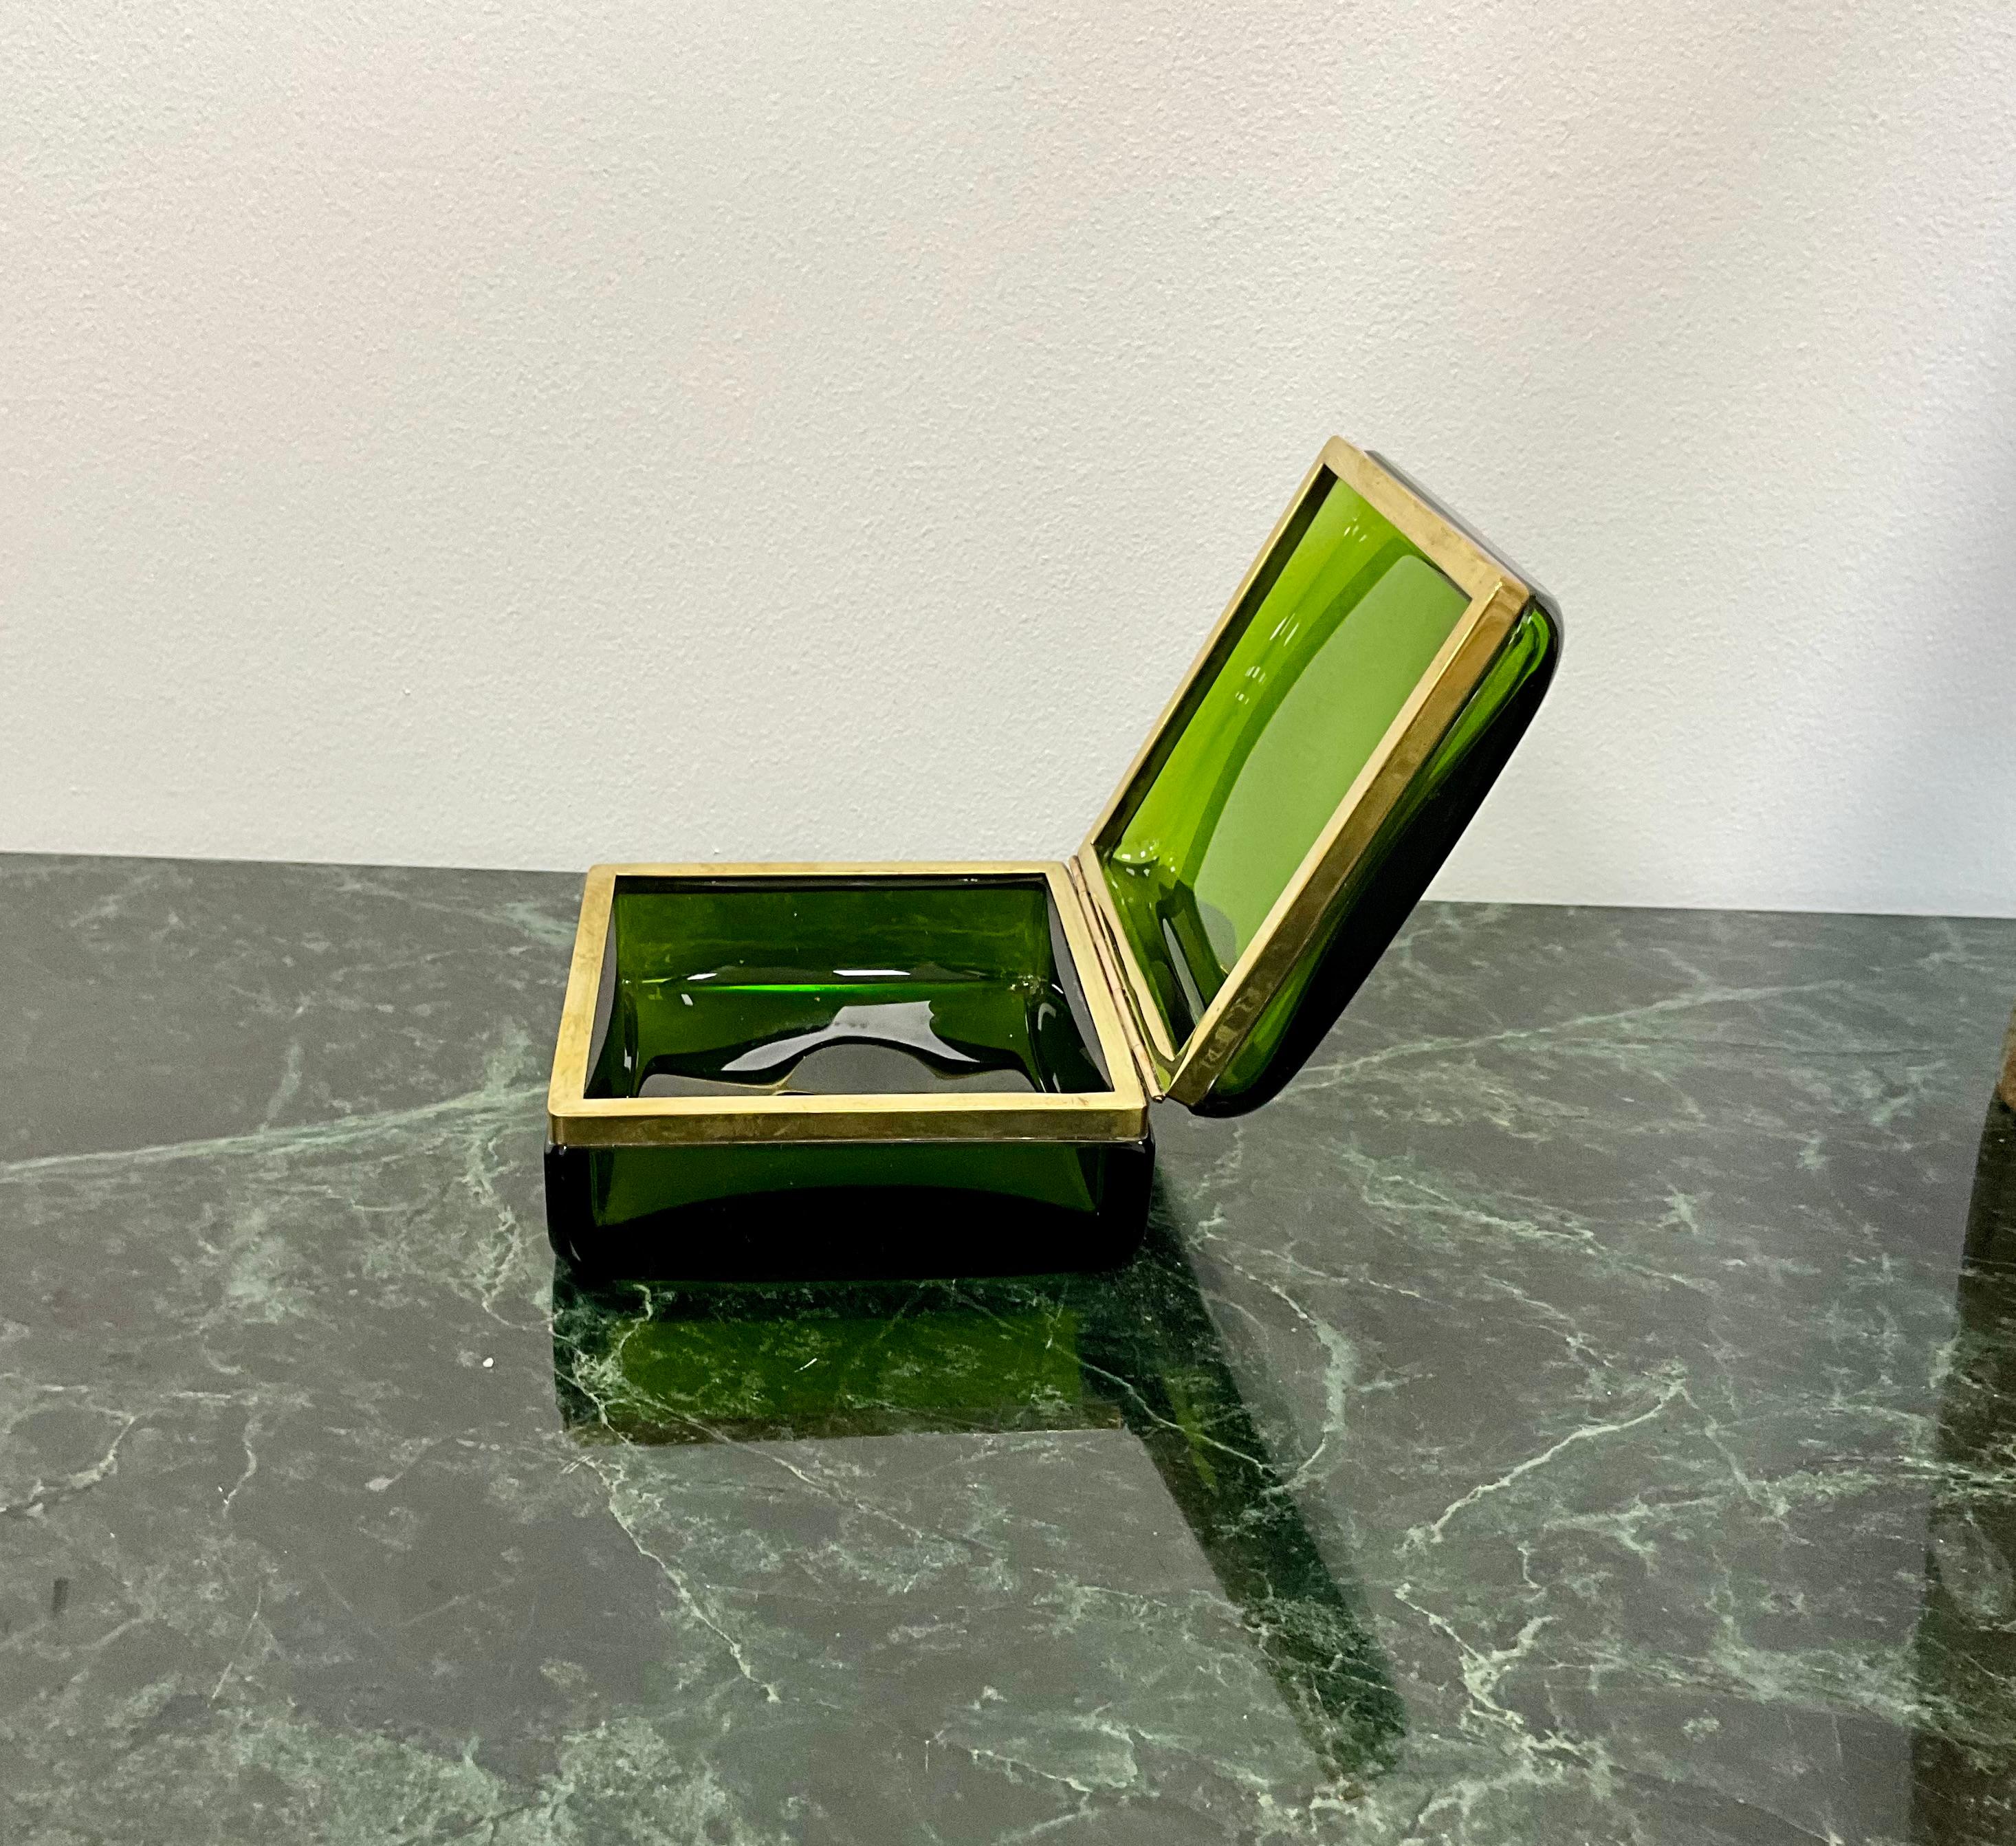 Hinged Murano glass box with brass trim in a stunning green color which brighten with light.. measuring 5’ x 4.5” x 2.5”. Showing minimal signs of wear this is a high quality Art Glass piece.